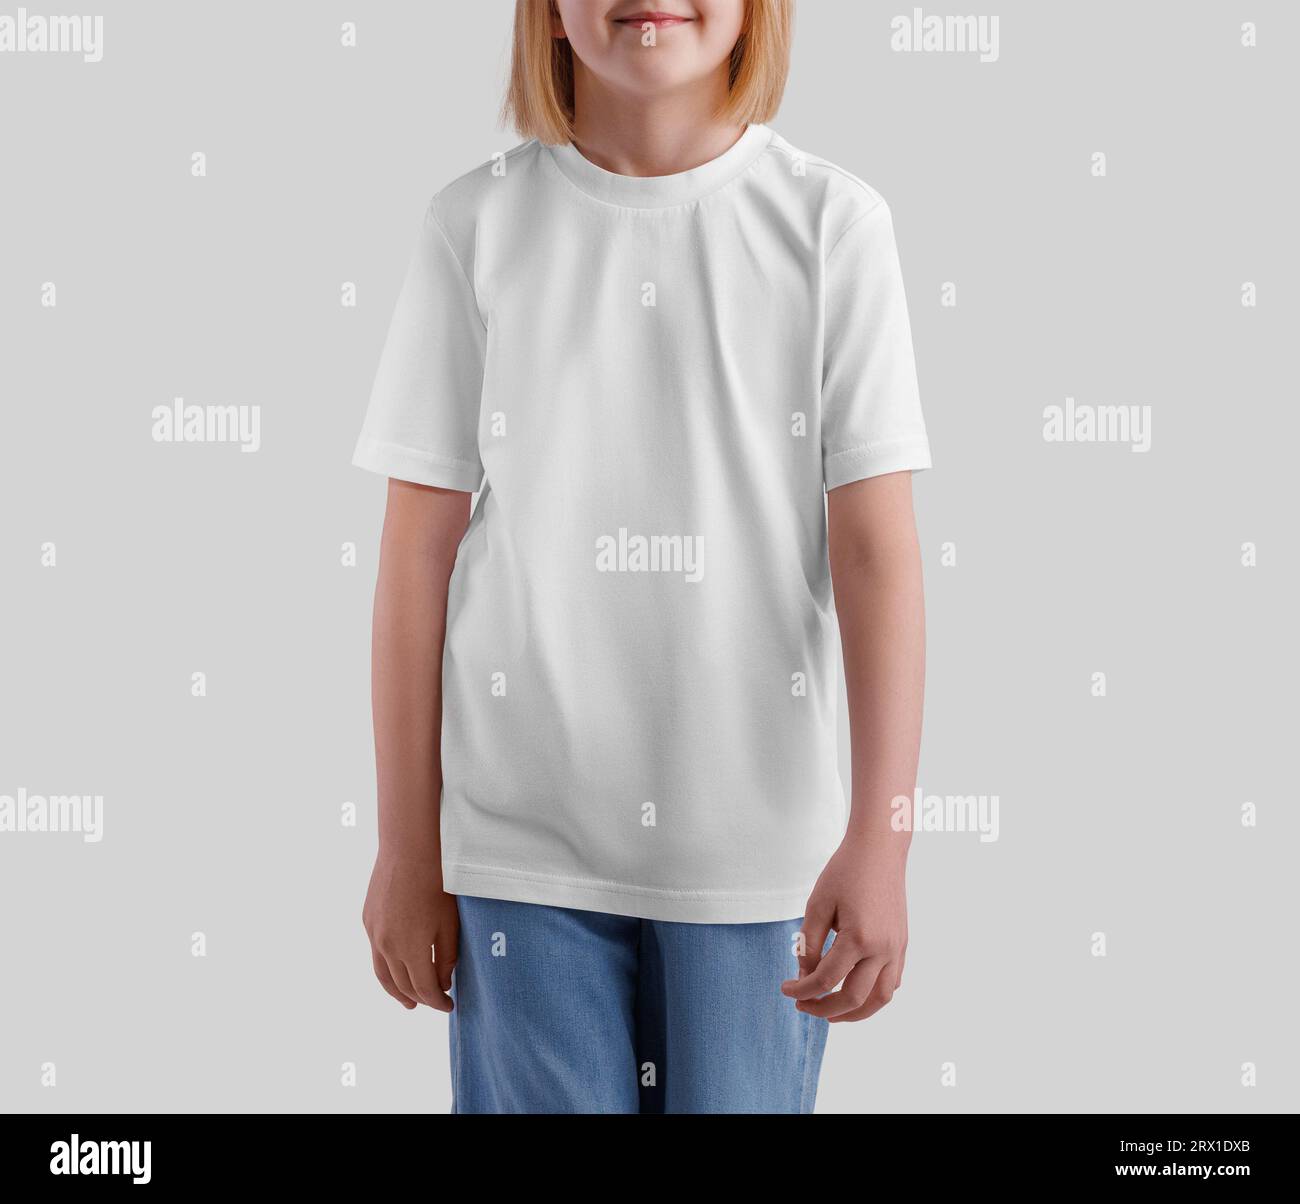 White t-shirt template on a posing child, for design, print, pattern, advertising, front view. Product photography. Mockup of casual kid's shirt isola Stock Photo